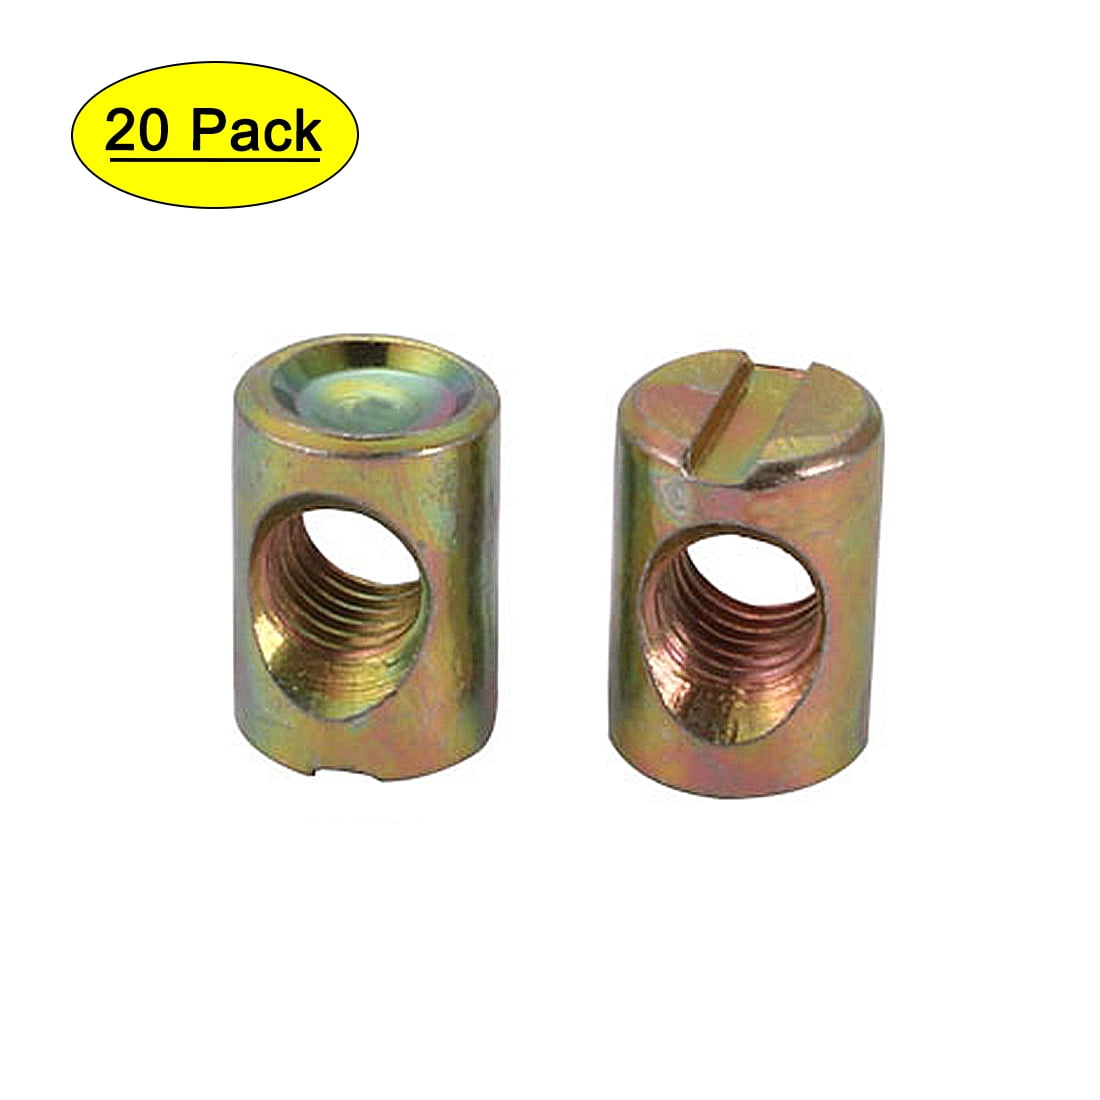 M6 M8 Barrel Nuts Cross Slotted Dowel Centre Threaded For Furniture Cot Bed 